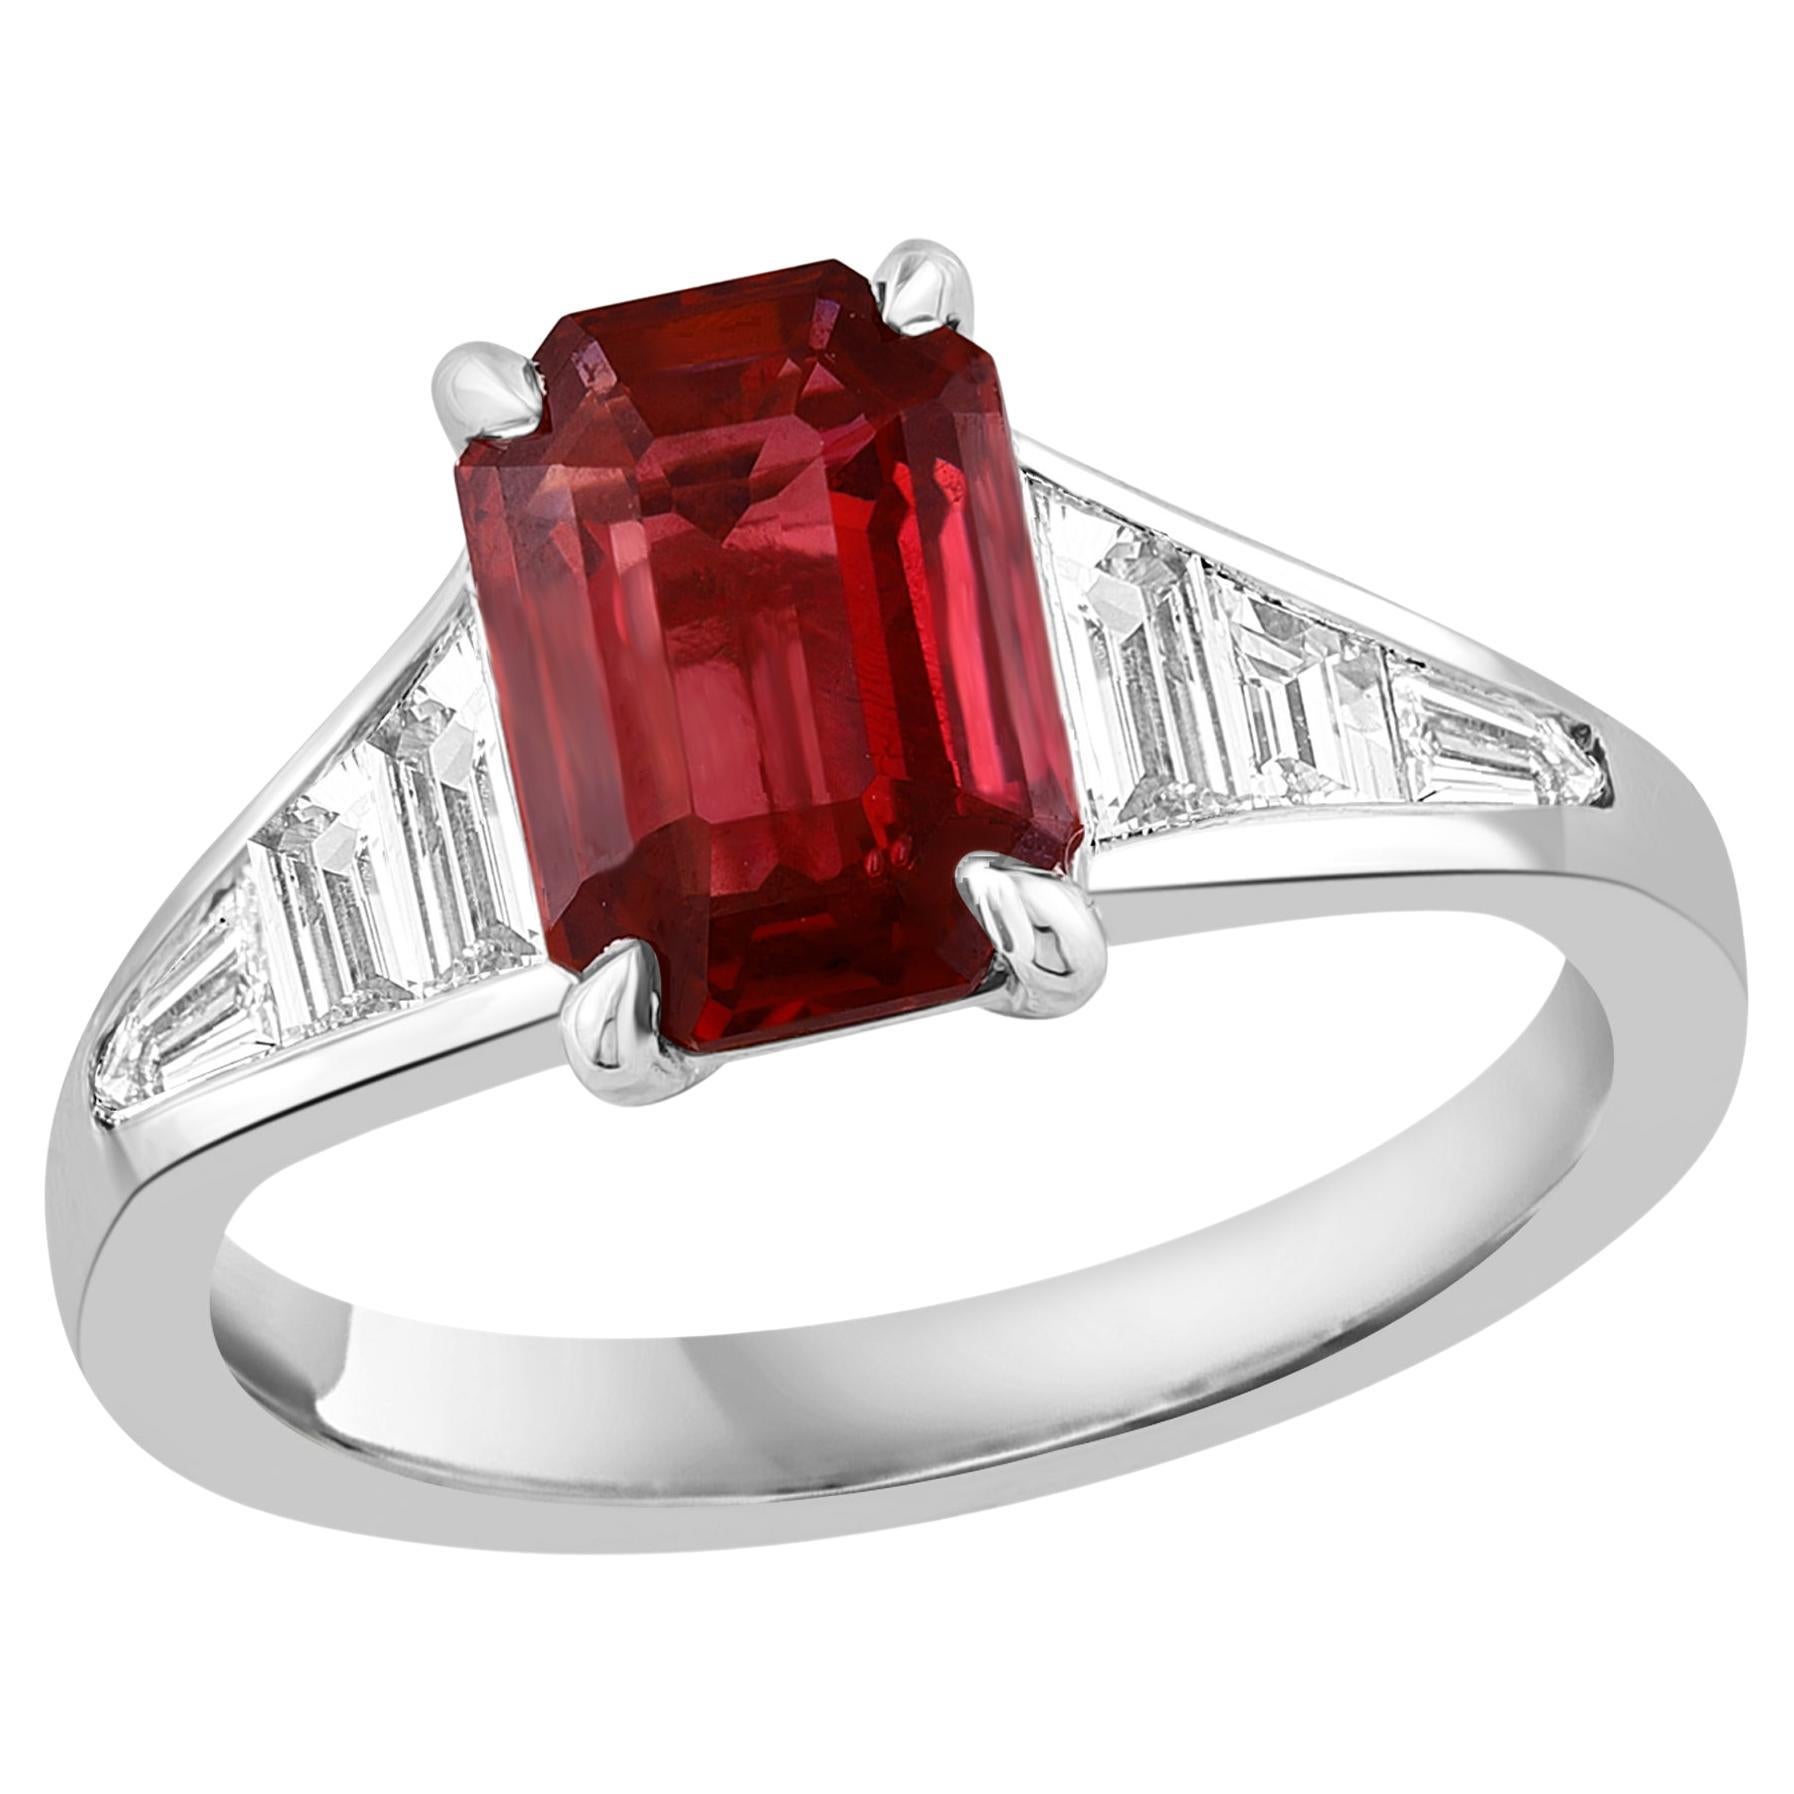 Certified 2.08 Carat Emerald Cut Natural Ruby and Diamond Ring in Platinum For Sale